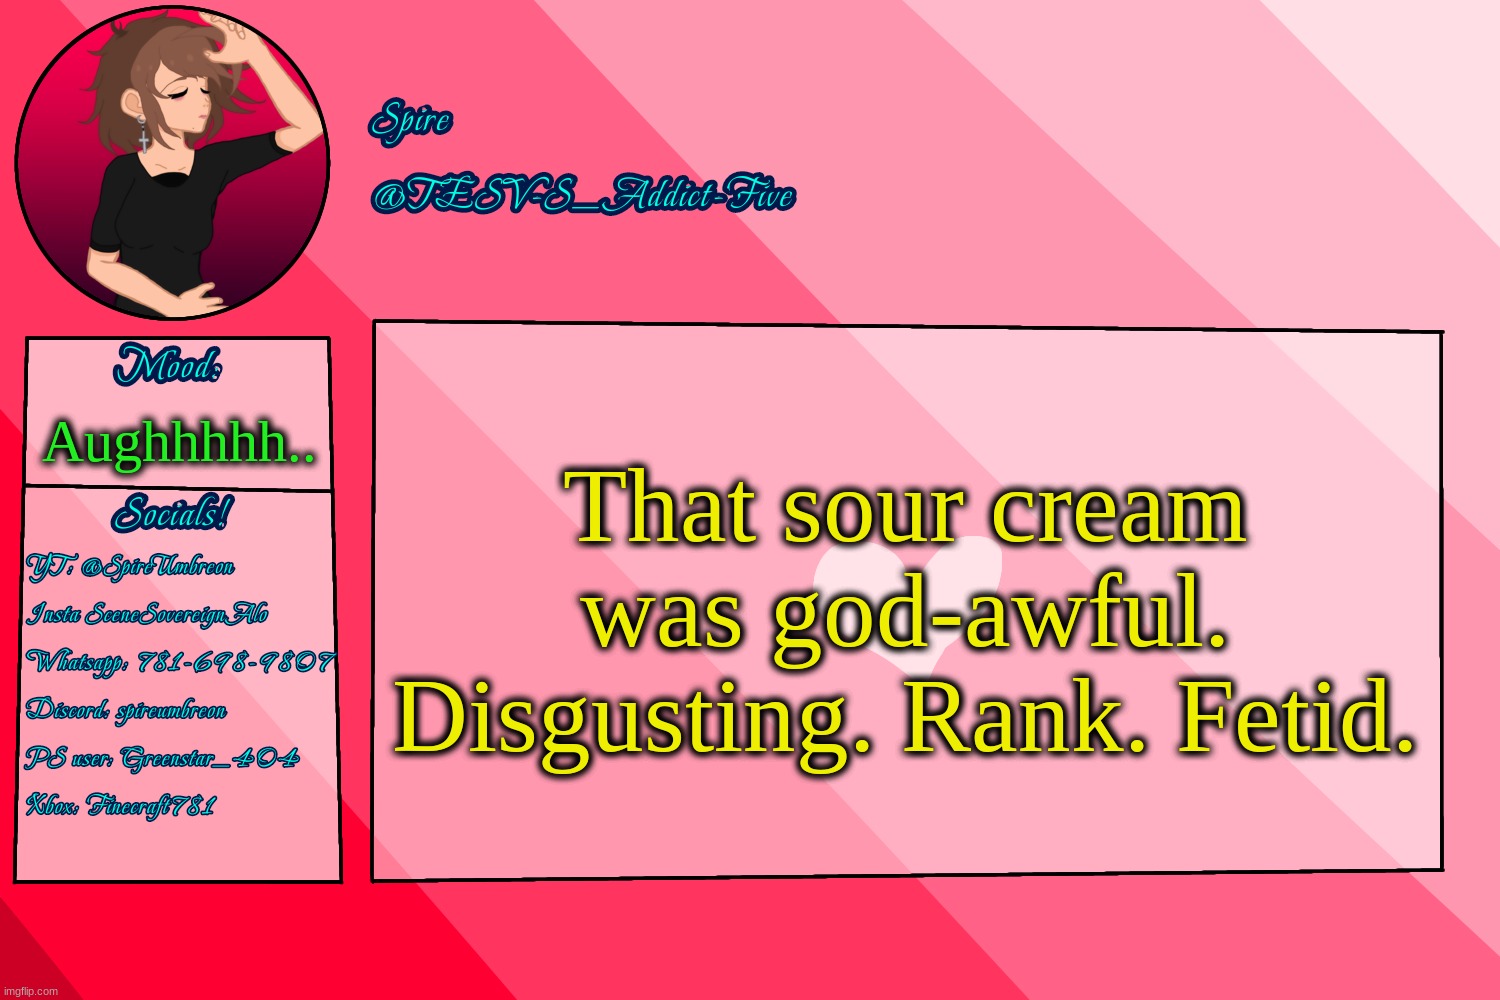 . | That sour cream was god-awful. Disgusting. Rank. Fetid. Aughhhhh.. | image tagged in tesv-s_addict-five announcement template | made w/ Imgflip meme maker